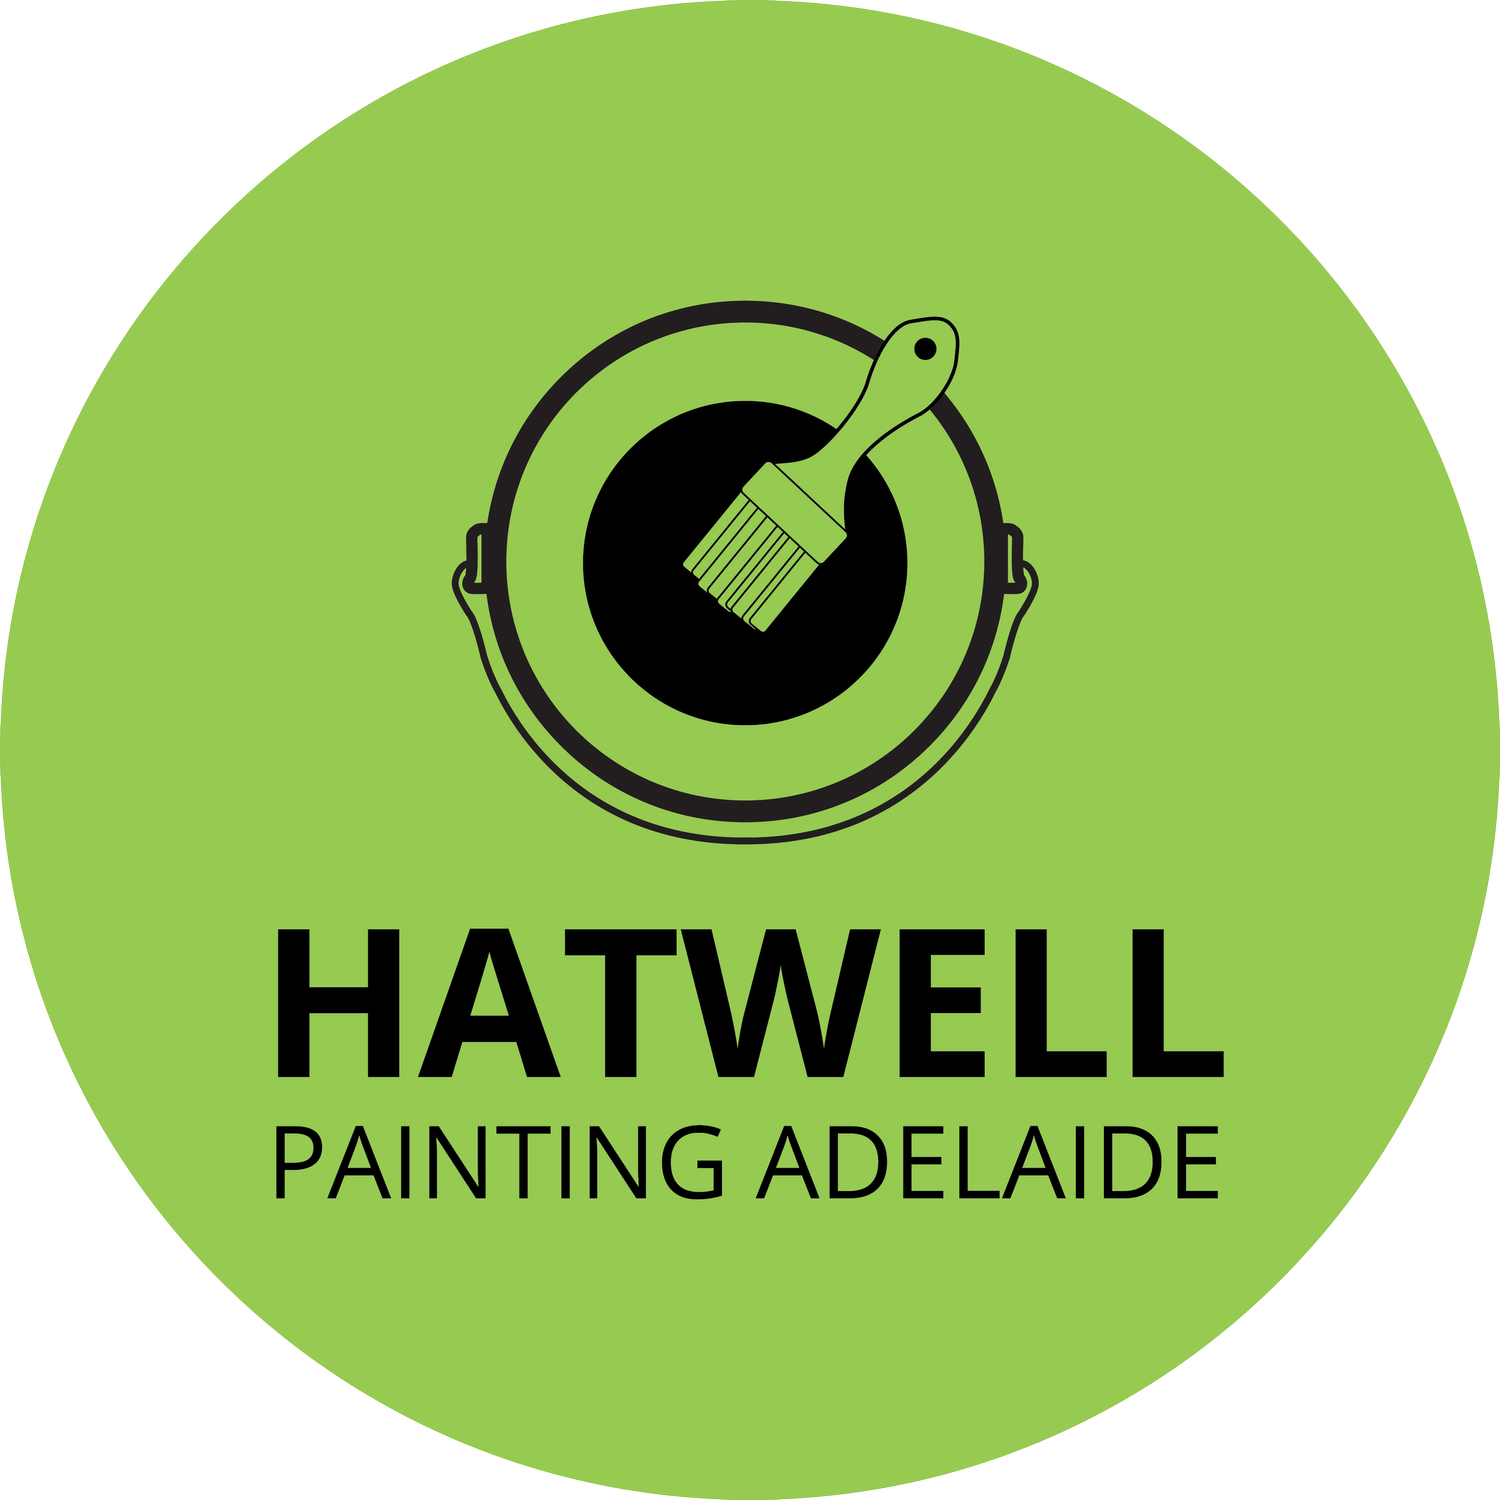 Hatwell Painting Adelaide